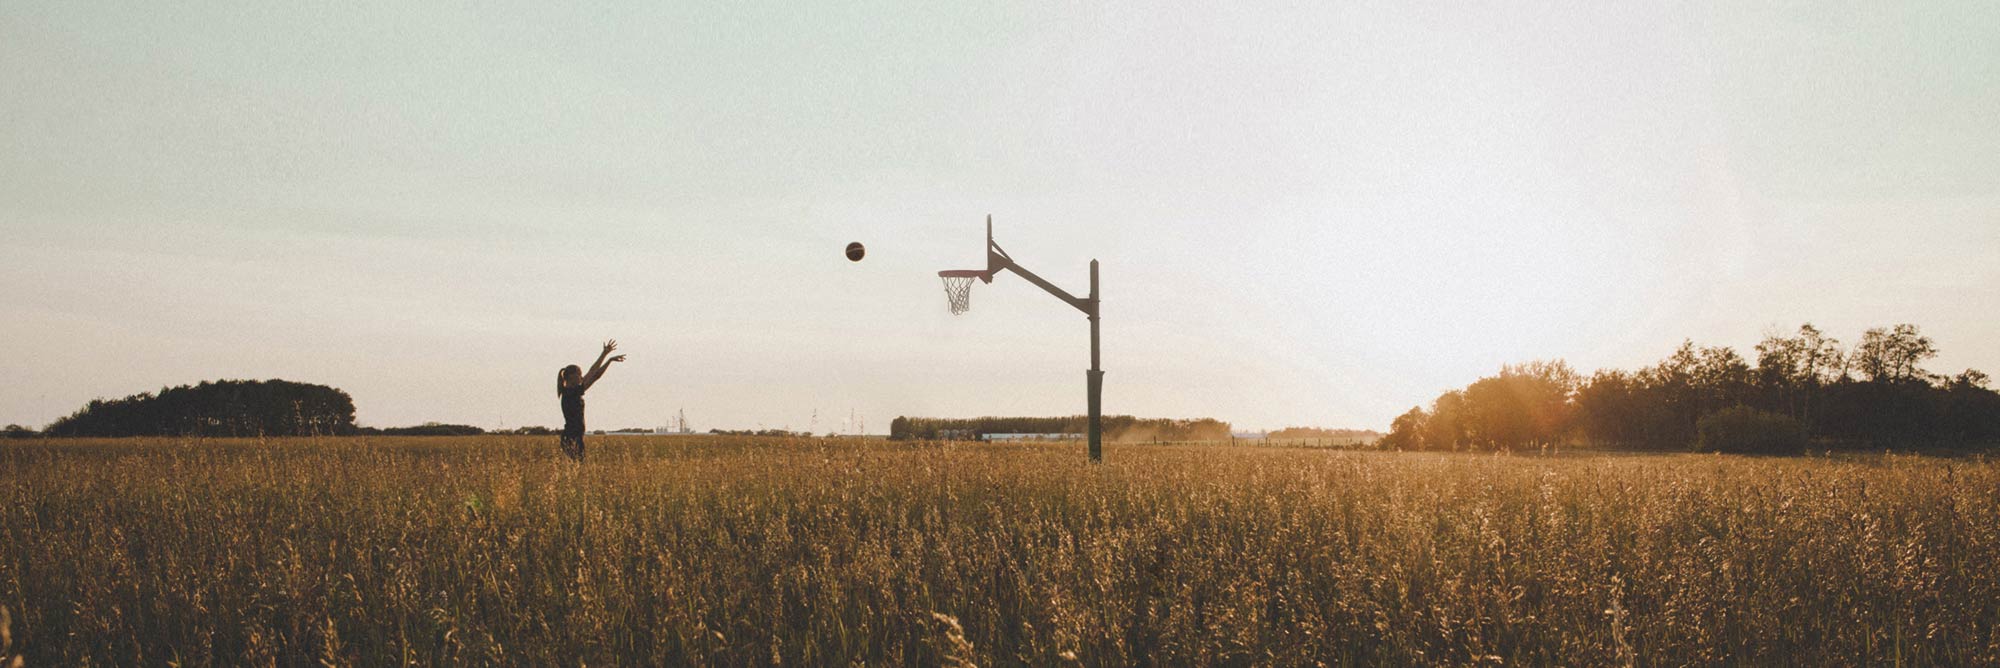 A young woman stands in a rural field and shoots a basketball at a hoop